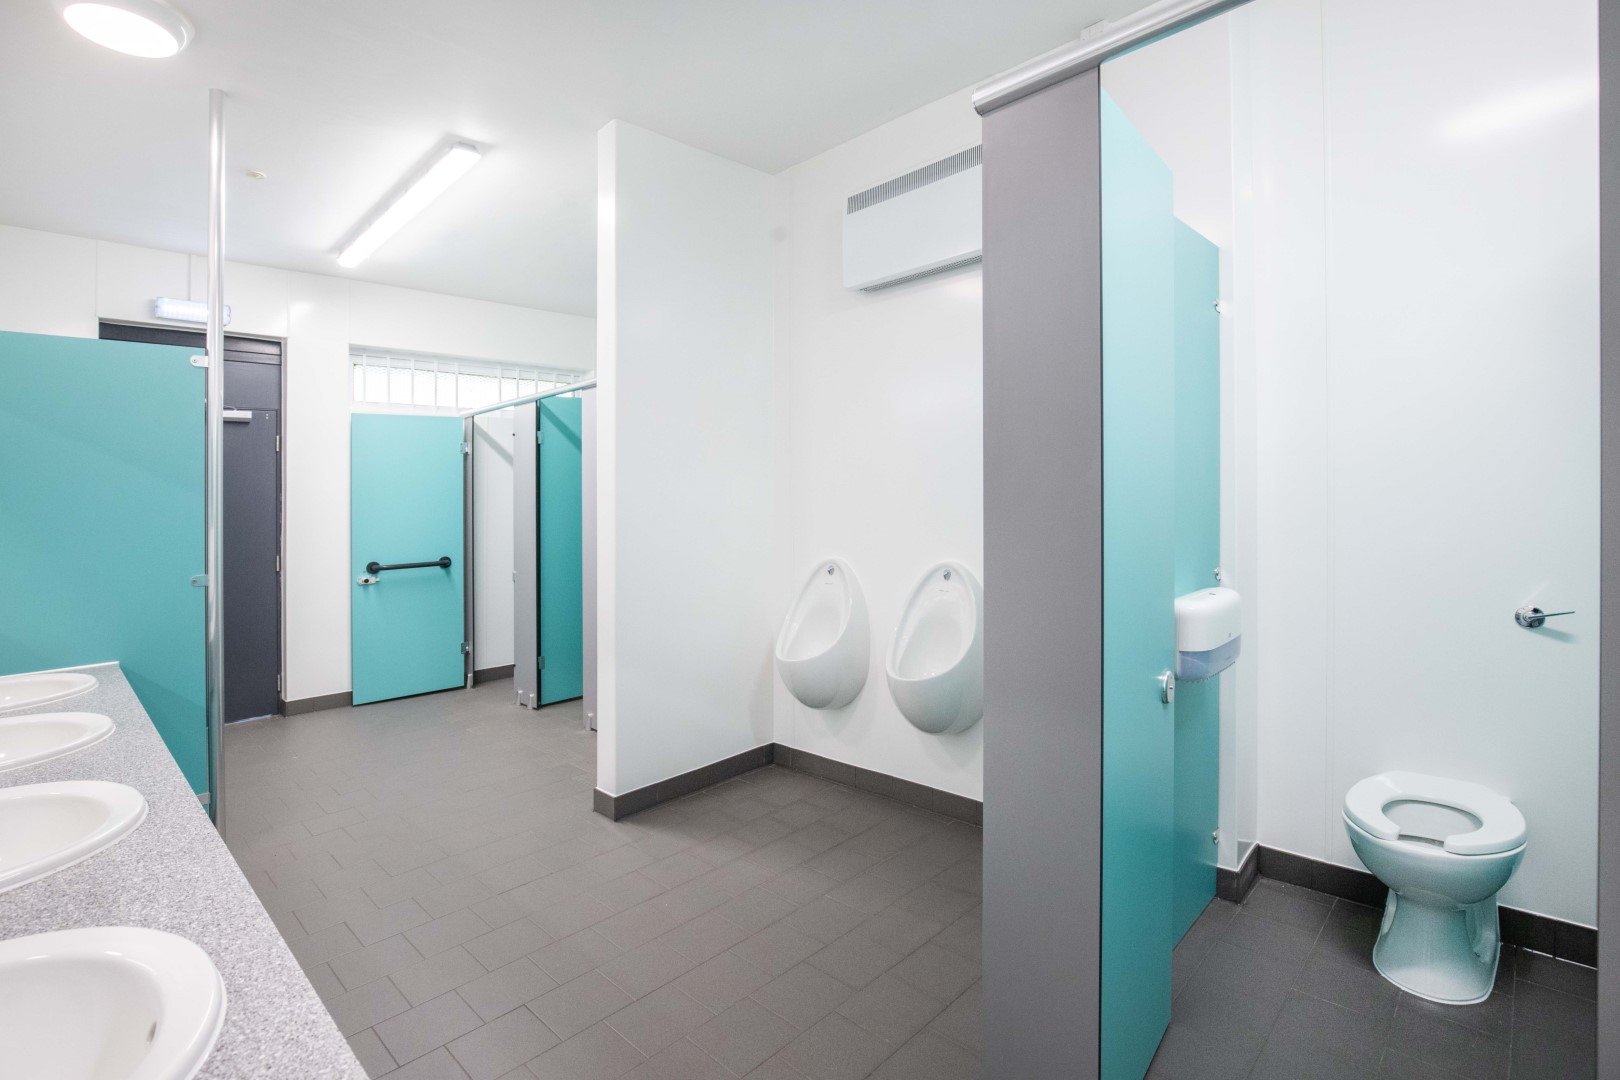 blue and grey washroom with urinals, showers and toilet cubicles at riverside campsite.jpg